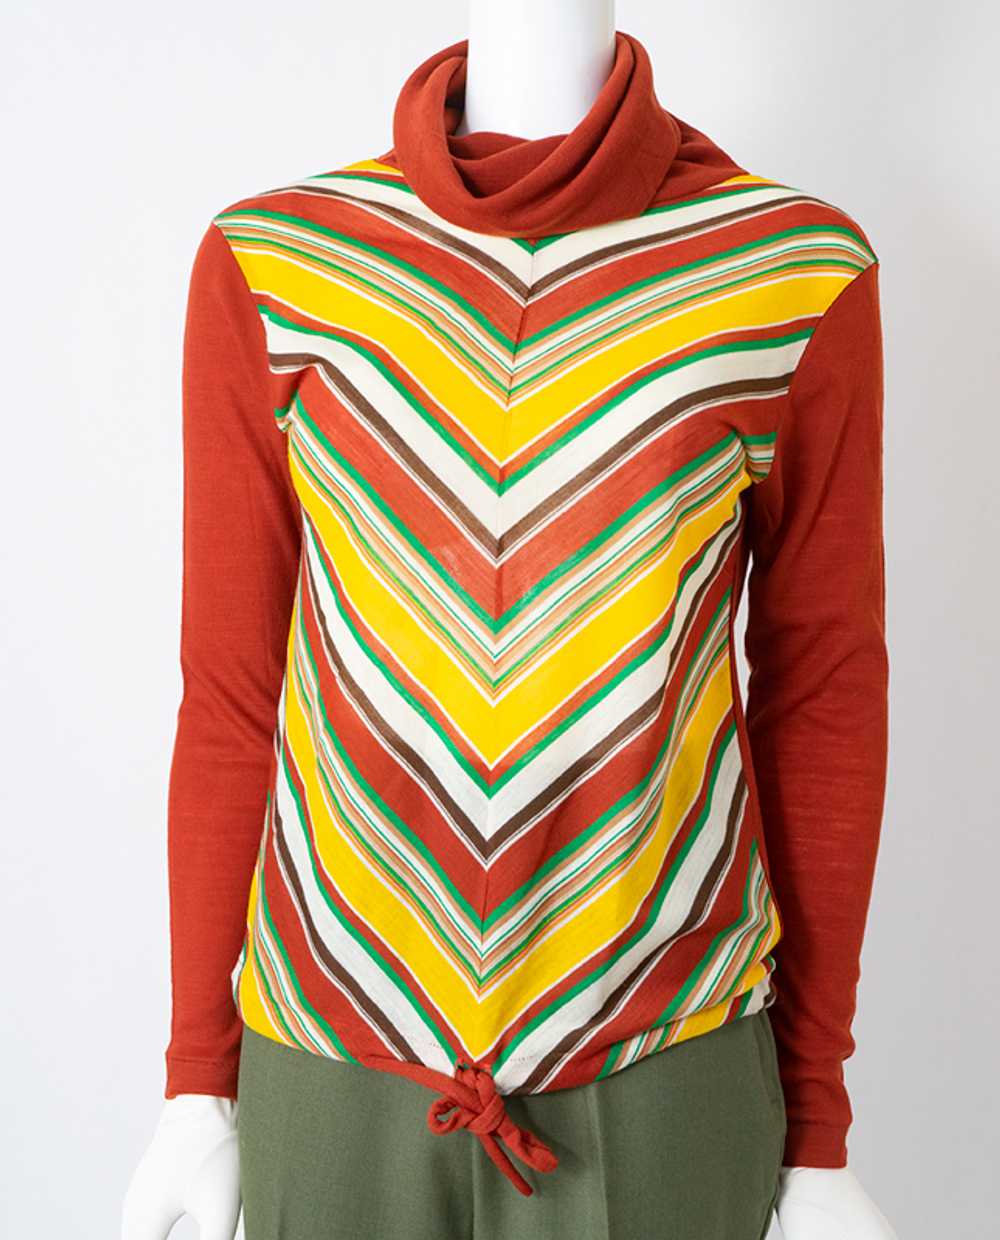 1970s Striped Cowl Neck Knit Top - image 1